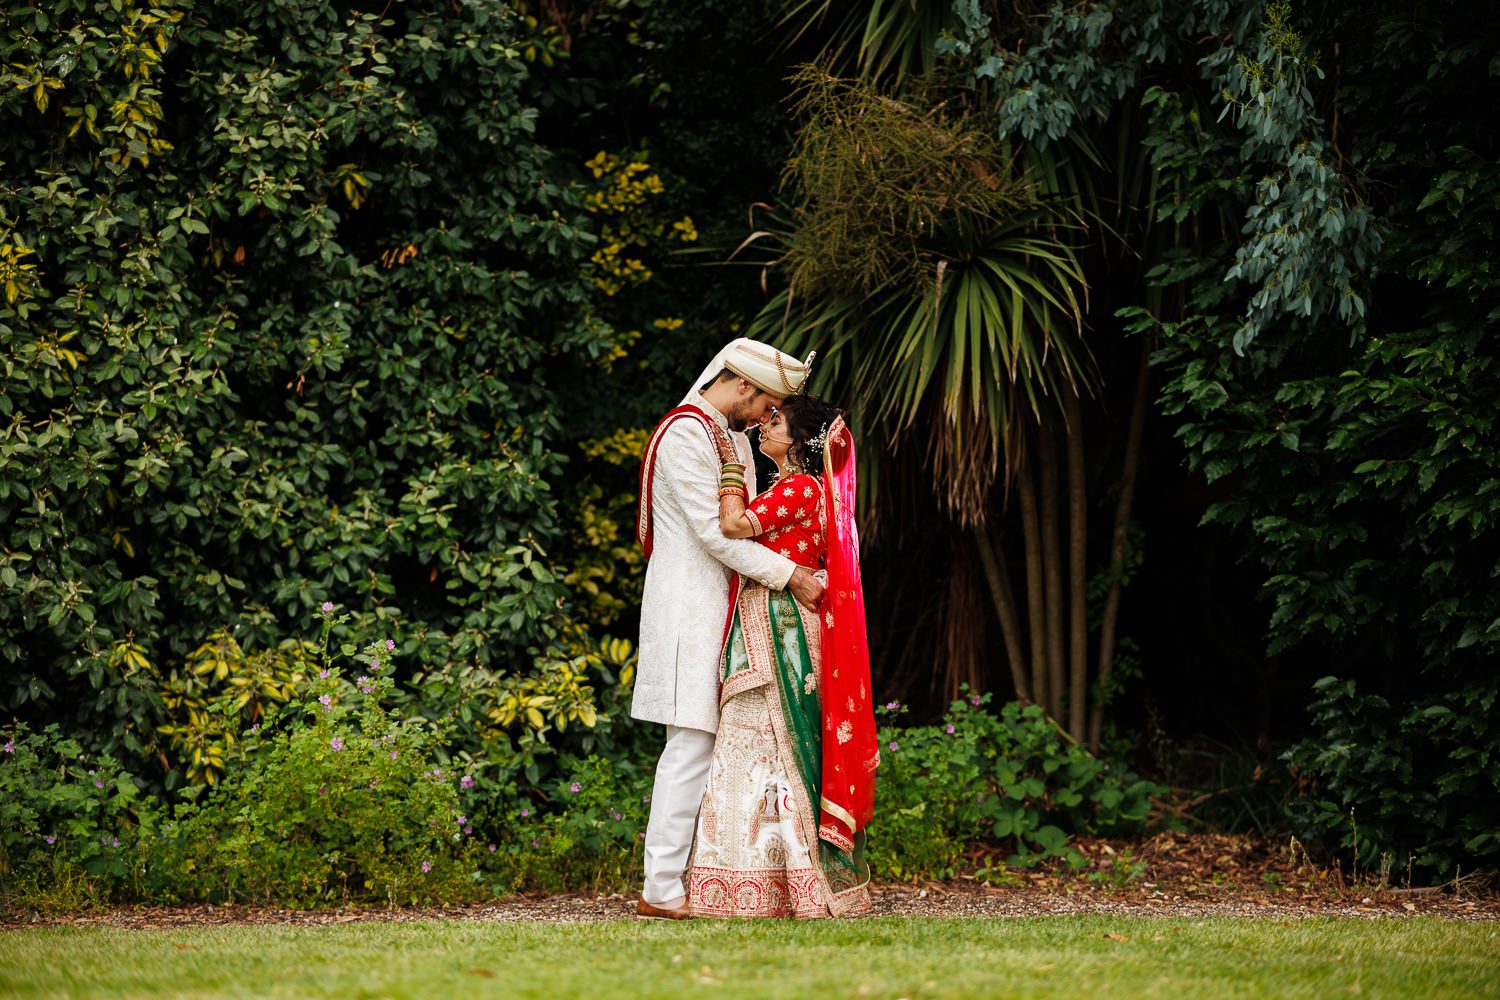 Punam and Sanjay’s Hindu wedding celebrations at Boreham House in Chelmsford Essex